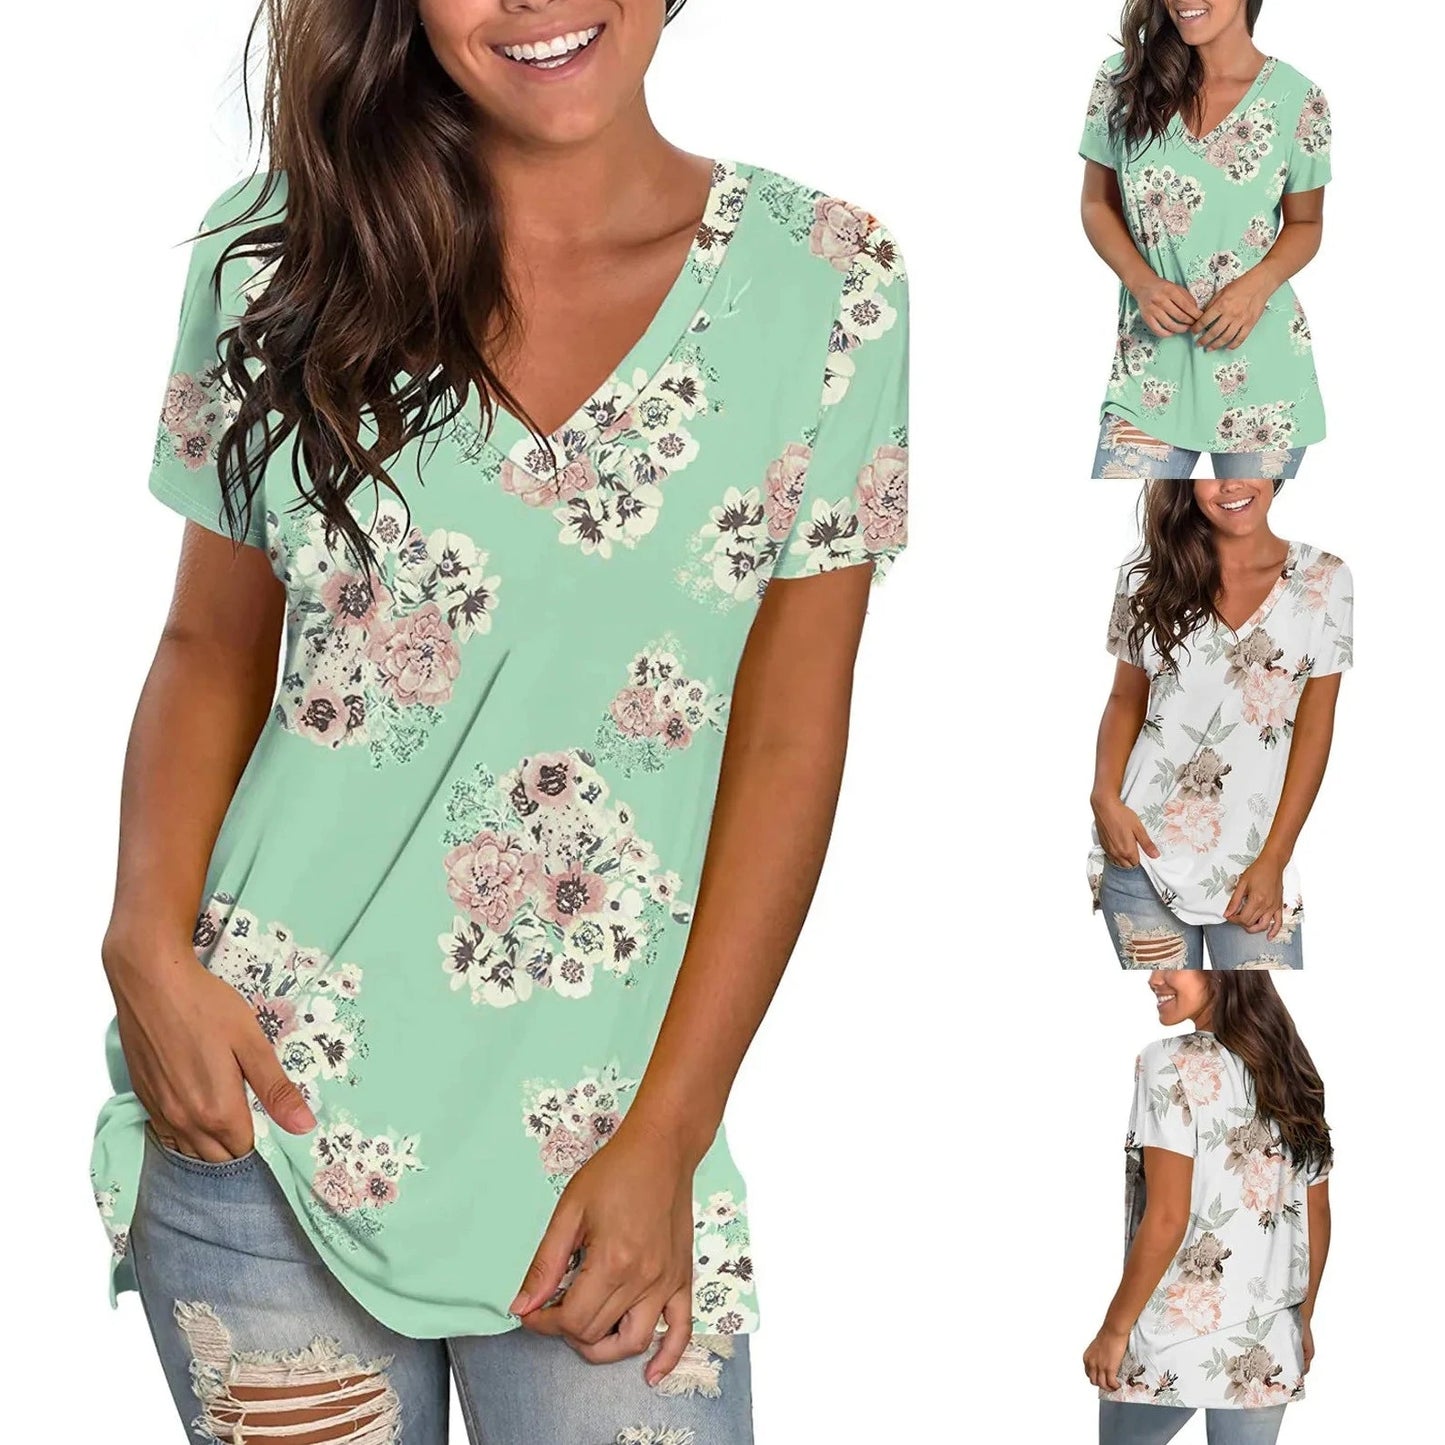 Women's Tops V-neck Printed T-shirt Casual